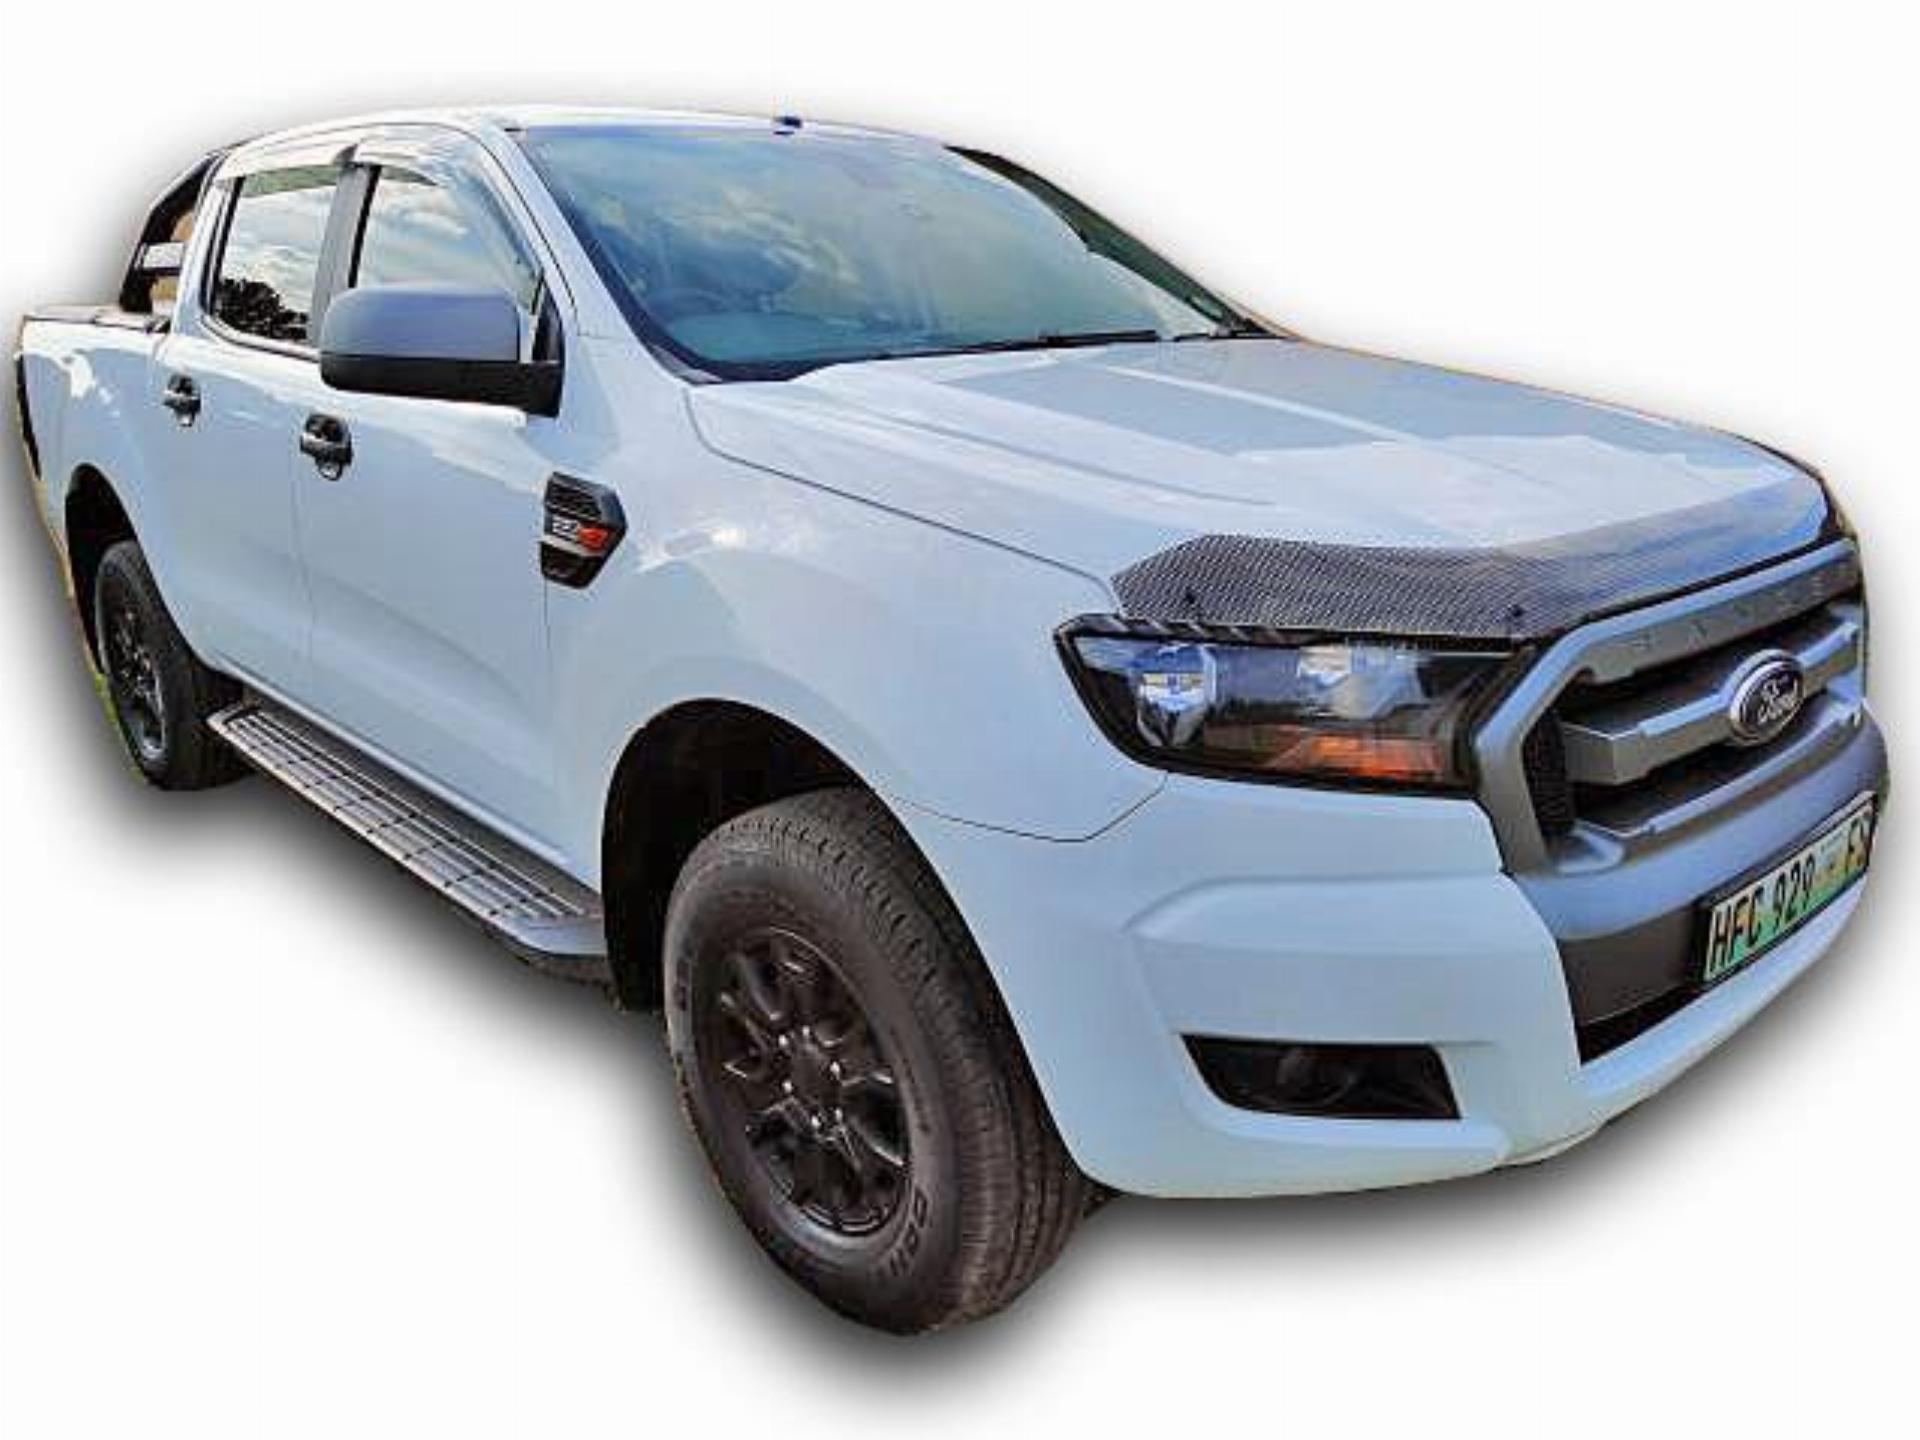 Used Ford Ranger 2.2 HP XLS Double Cab 2016 on auction - PV1031586